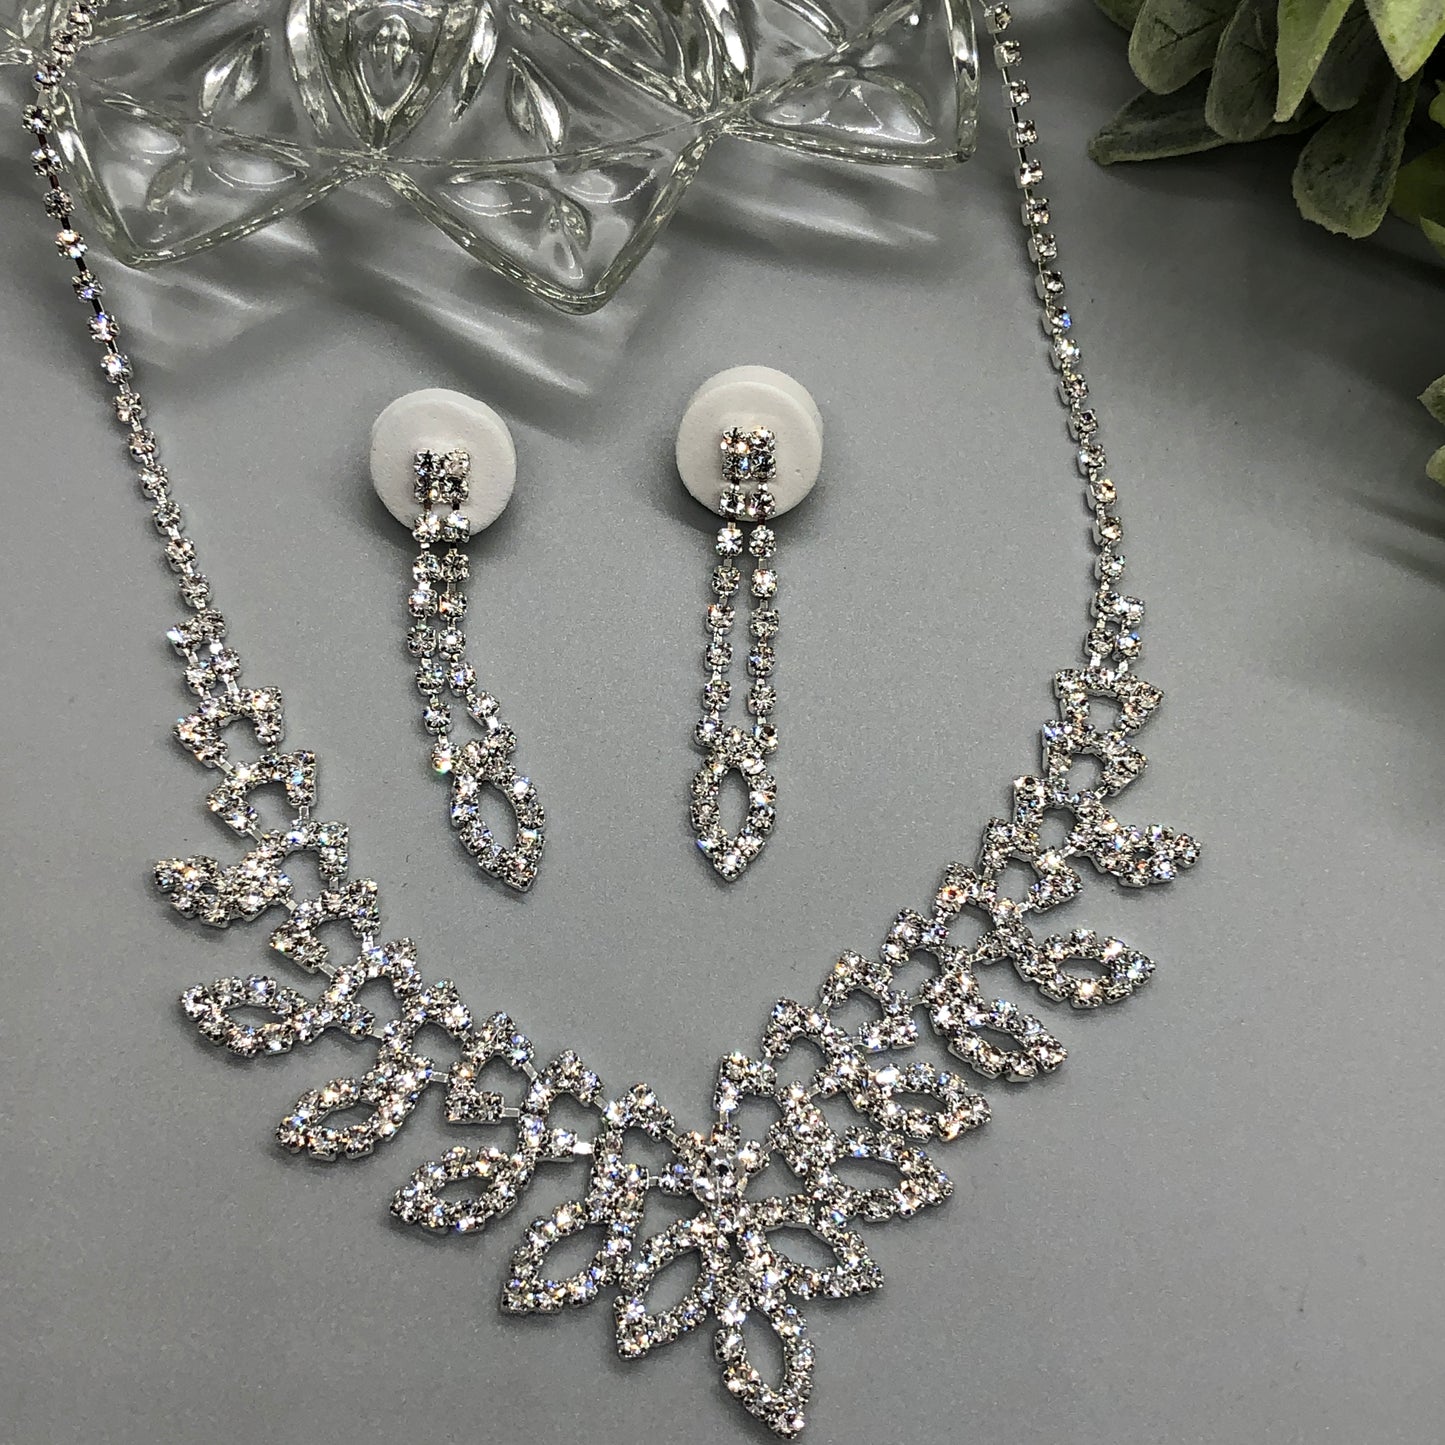 Crystal Rhinestone Leaves Bridal Necklace Earrings Sets Wedding Formal Shower Party Event Accessories